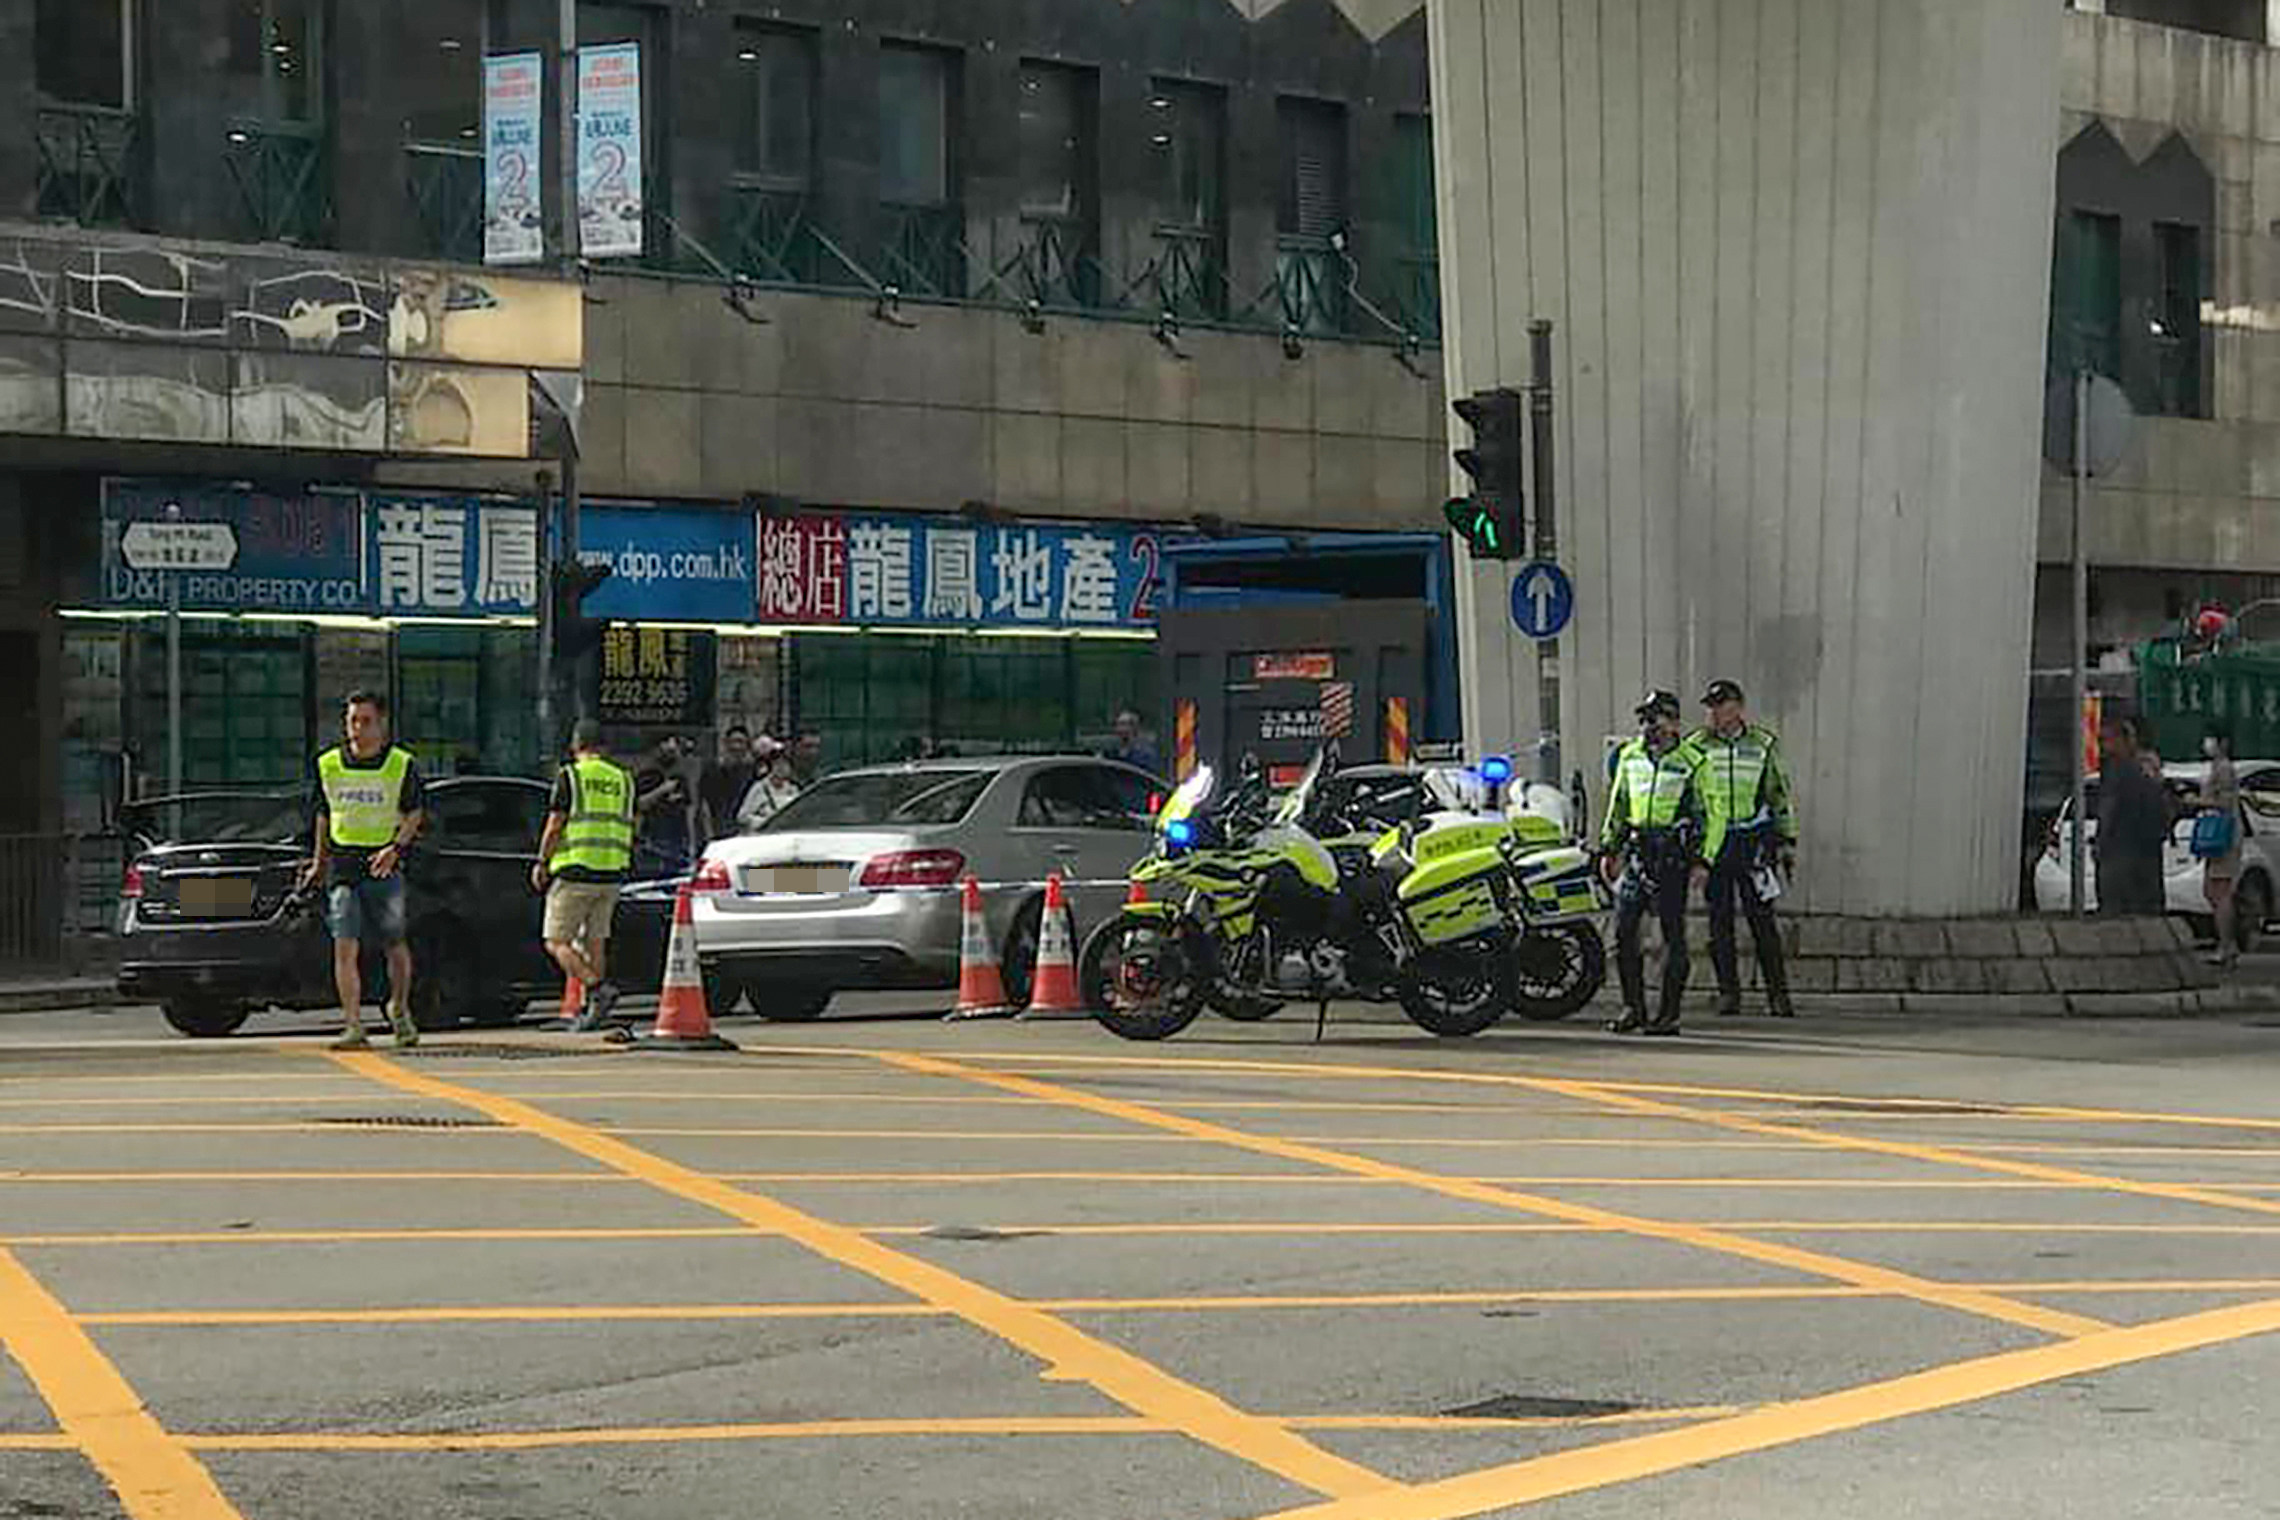 The elderly pedestrian was hit while crossing the road on Monday morning. Photo: Facebook/@Bosco Chu